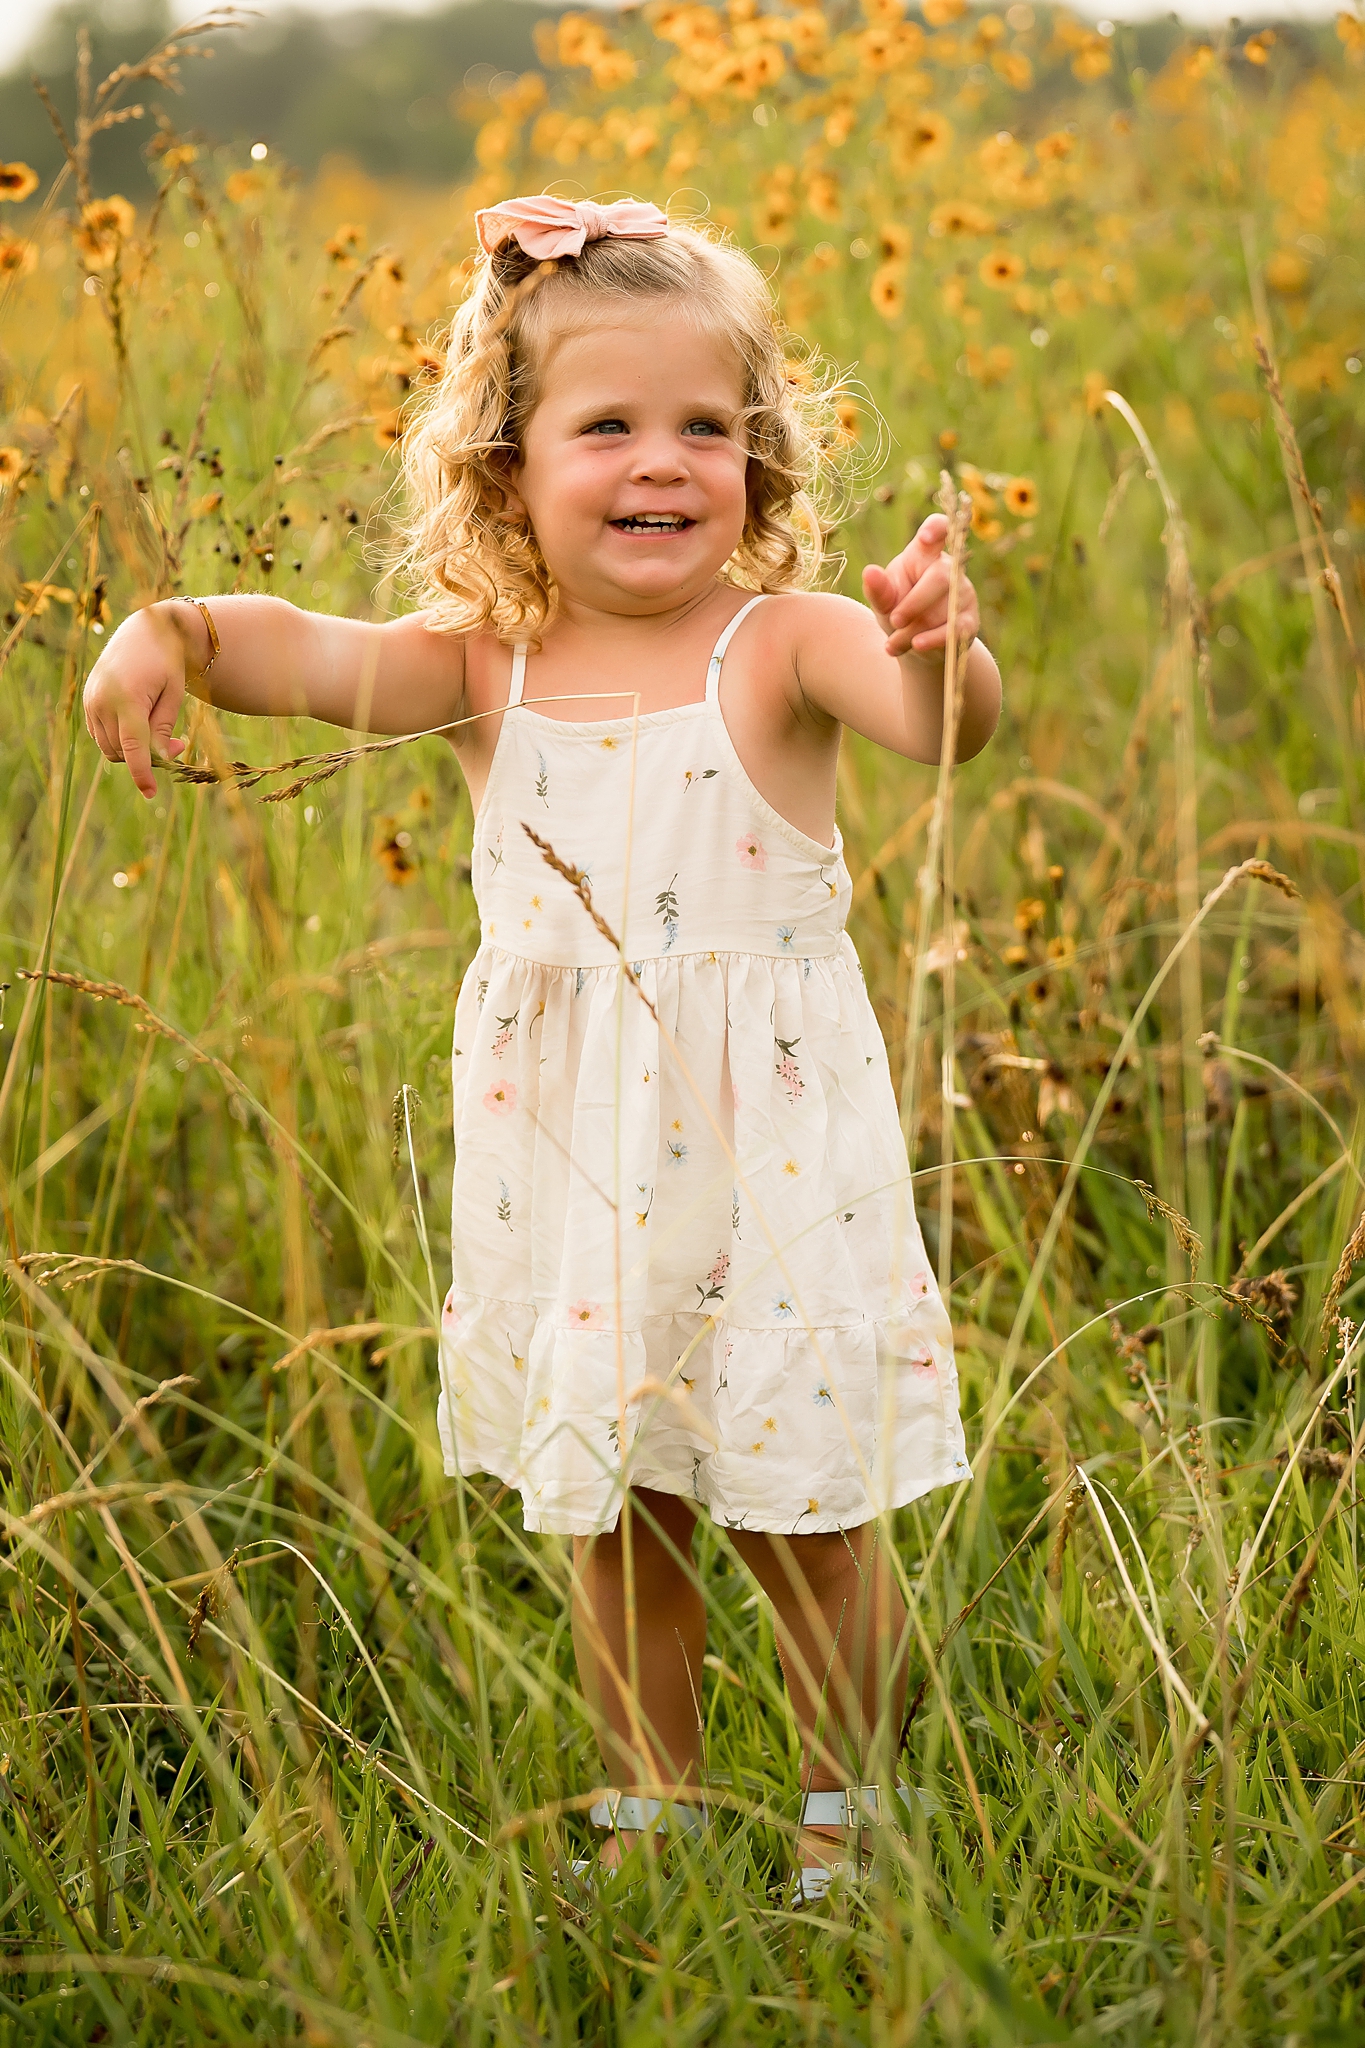 Spring Photo Ideas and Poses Family Photography21